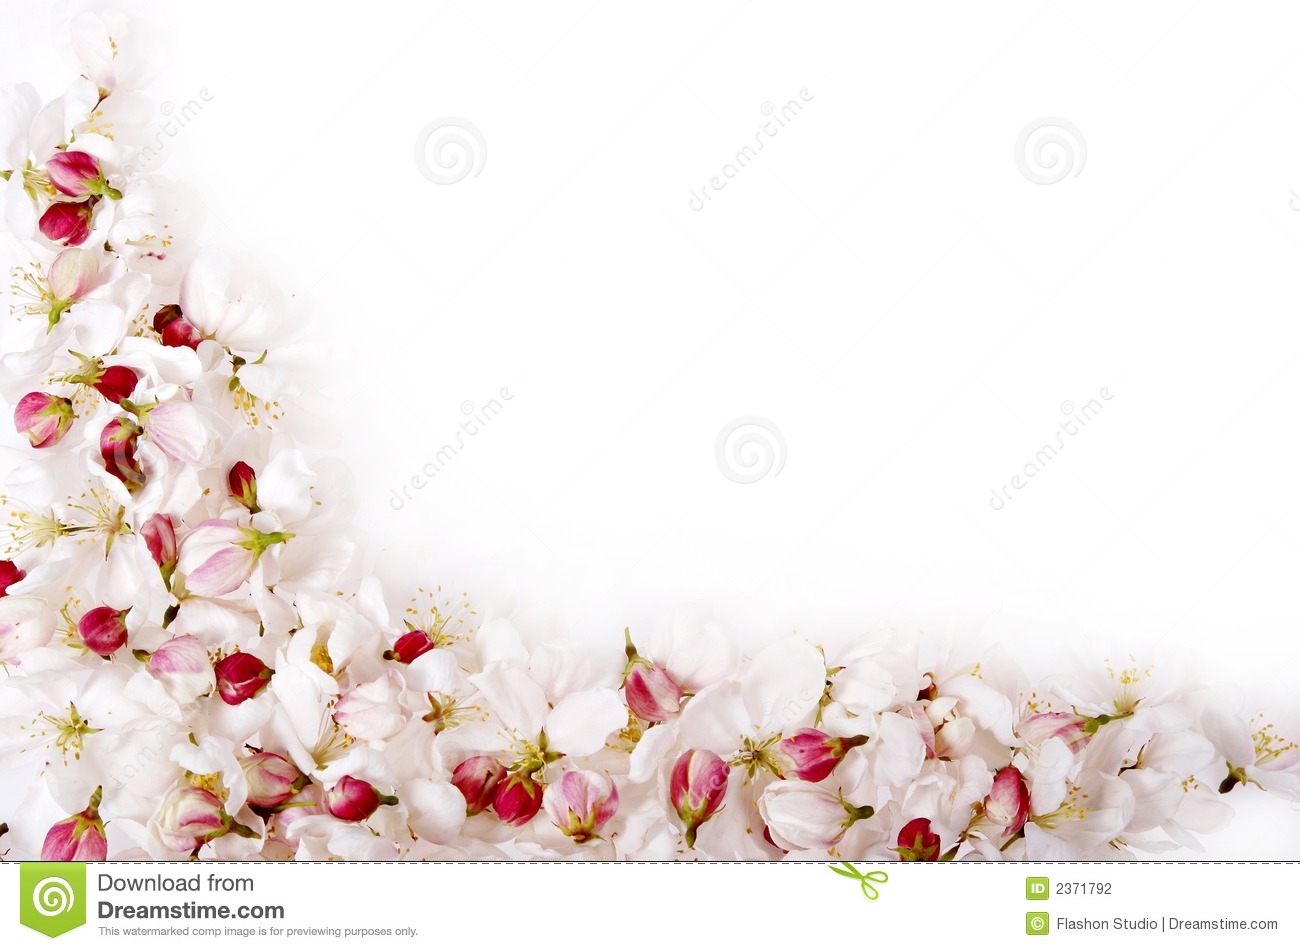 Isolated Cherry Blossom Border Stock Photography   Image  2371792